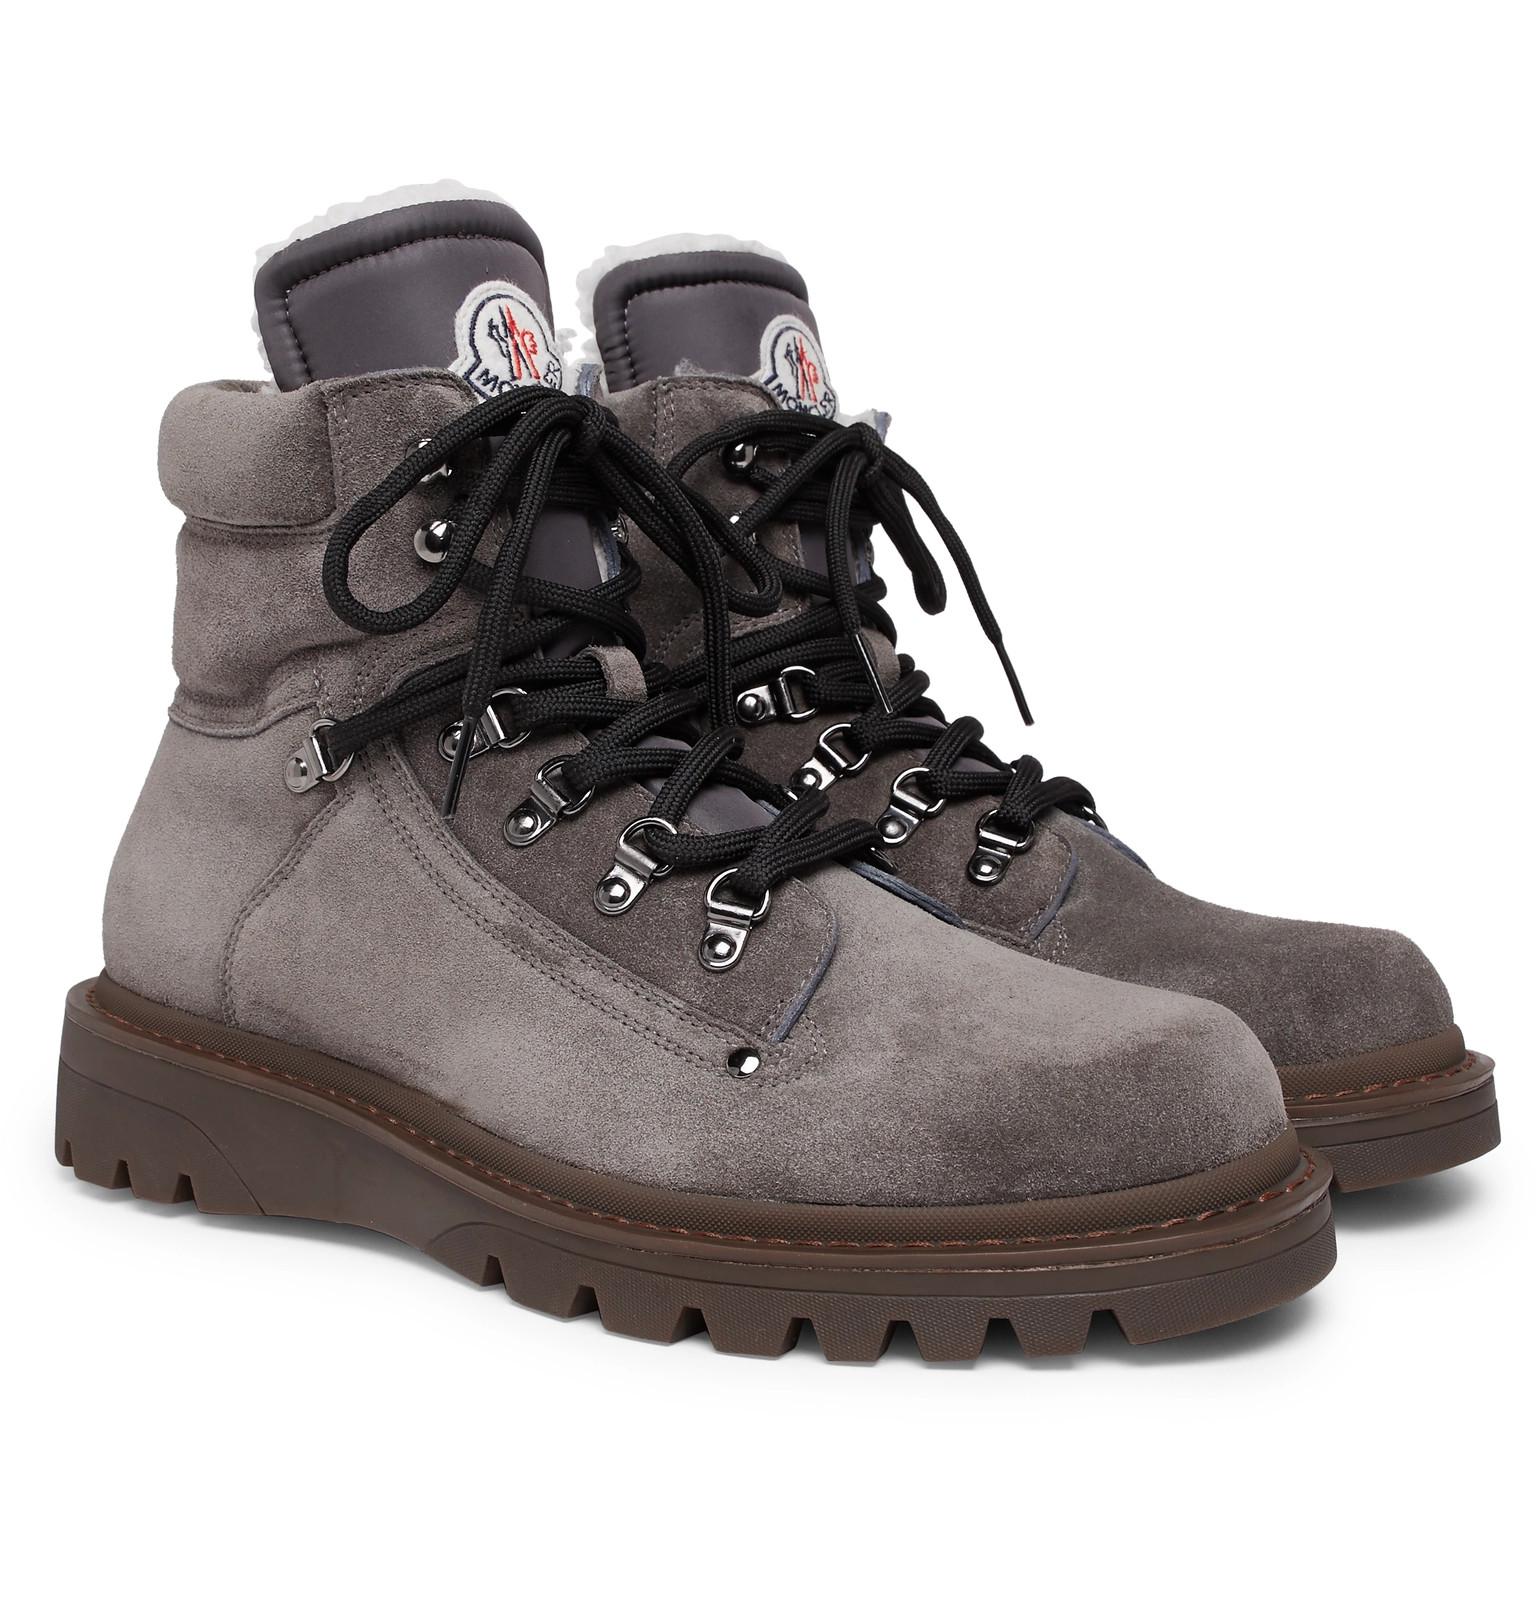 Moncler Egide Shearling-lined Suede Walking Boots in Gray for Men - Lyst